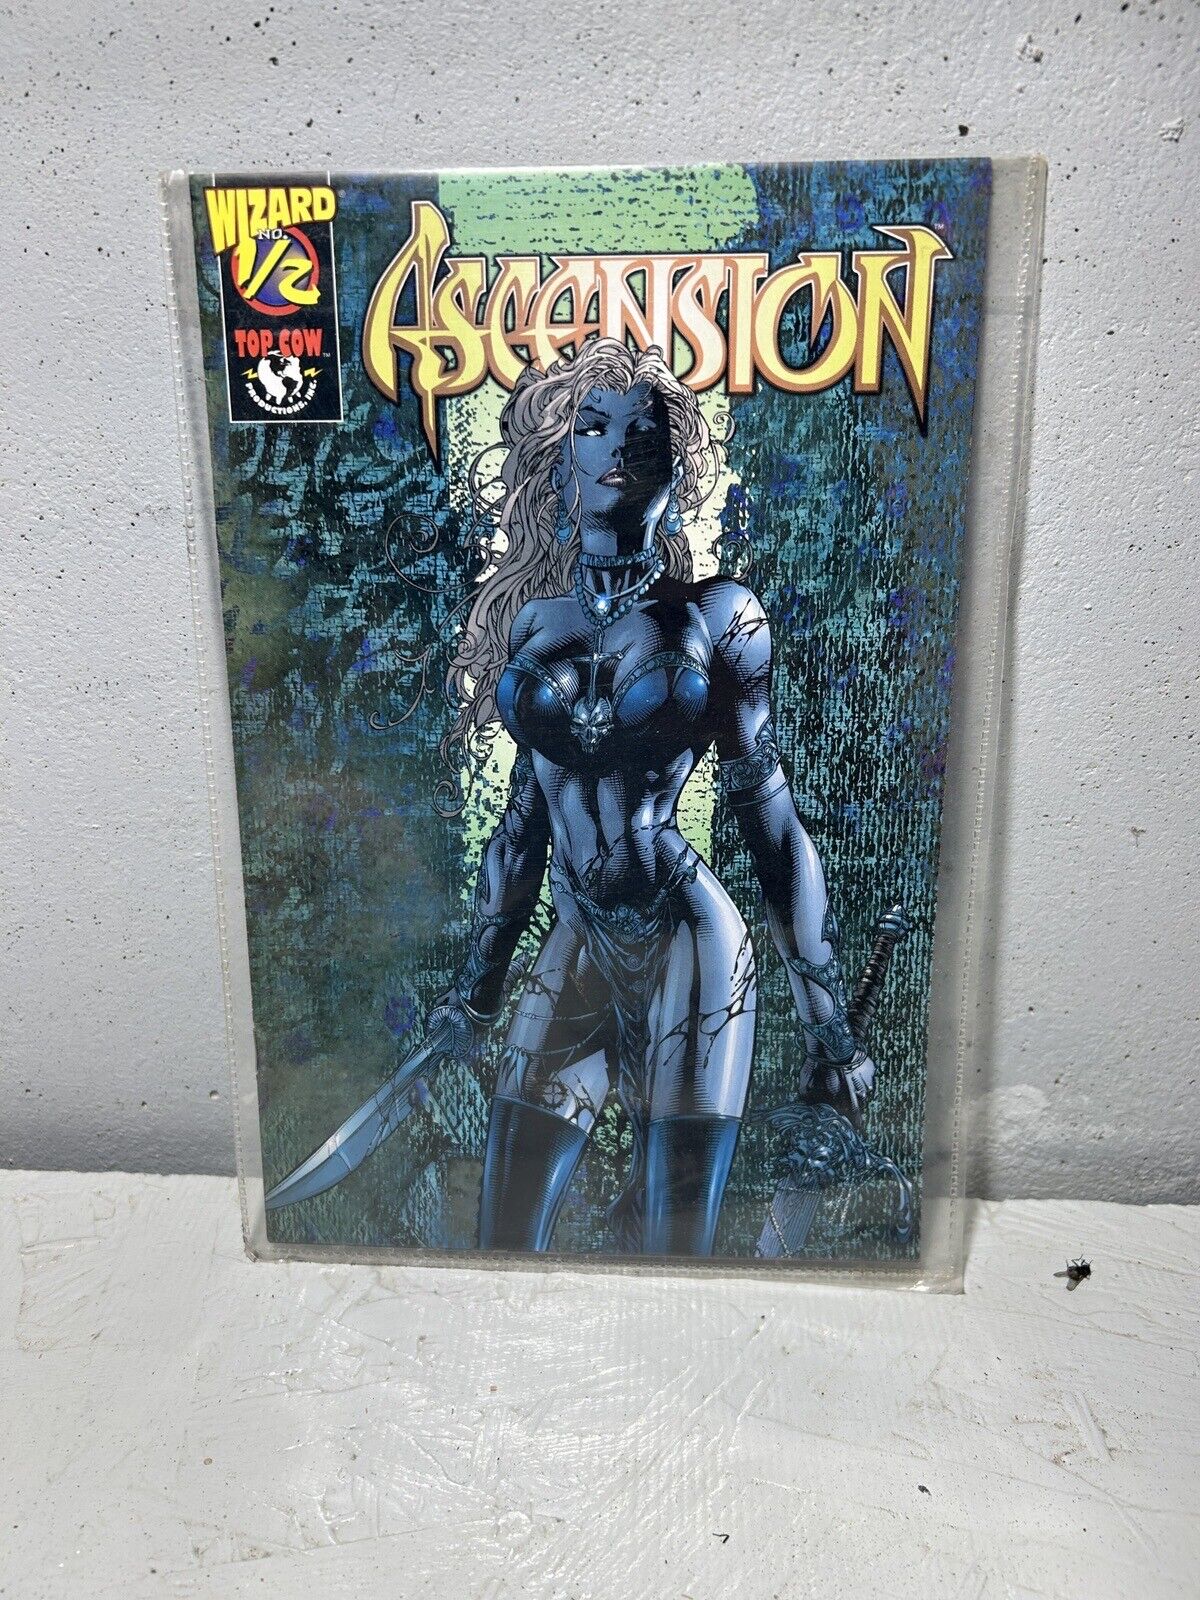 Ascension #1/2 Wizard X with COA. 1997 TOP COW Image Comics. David Finch